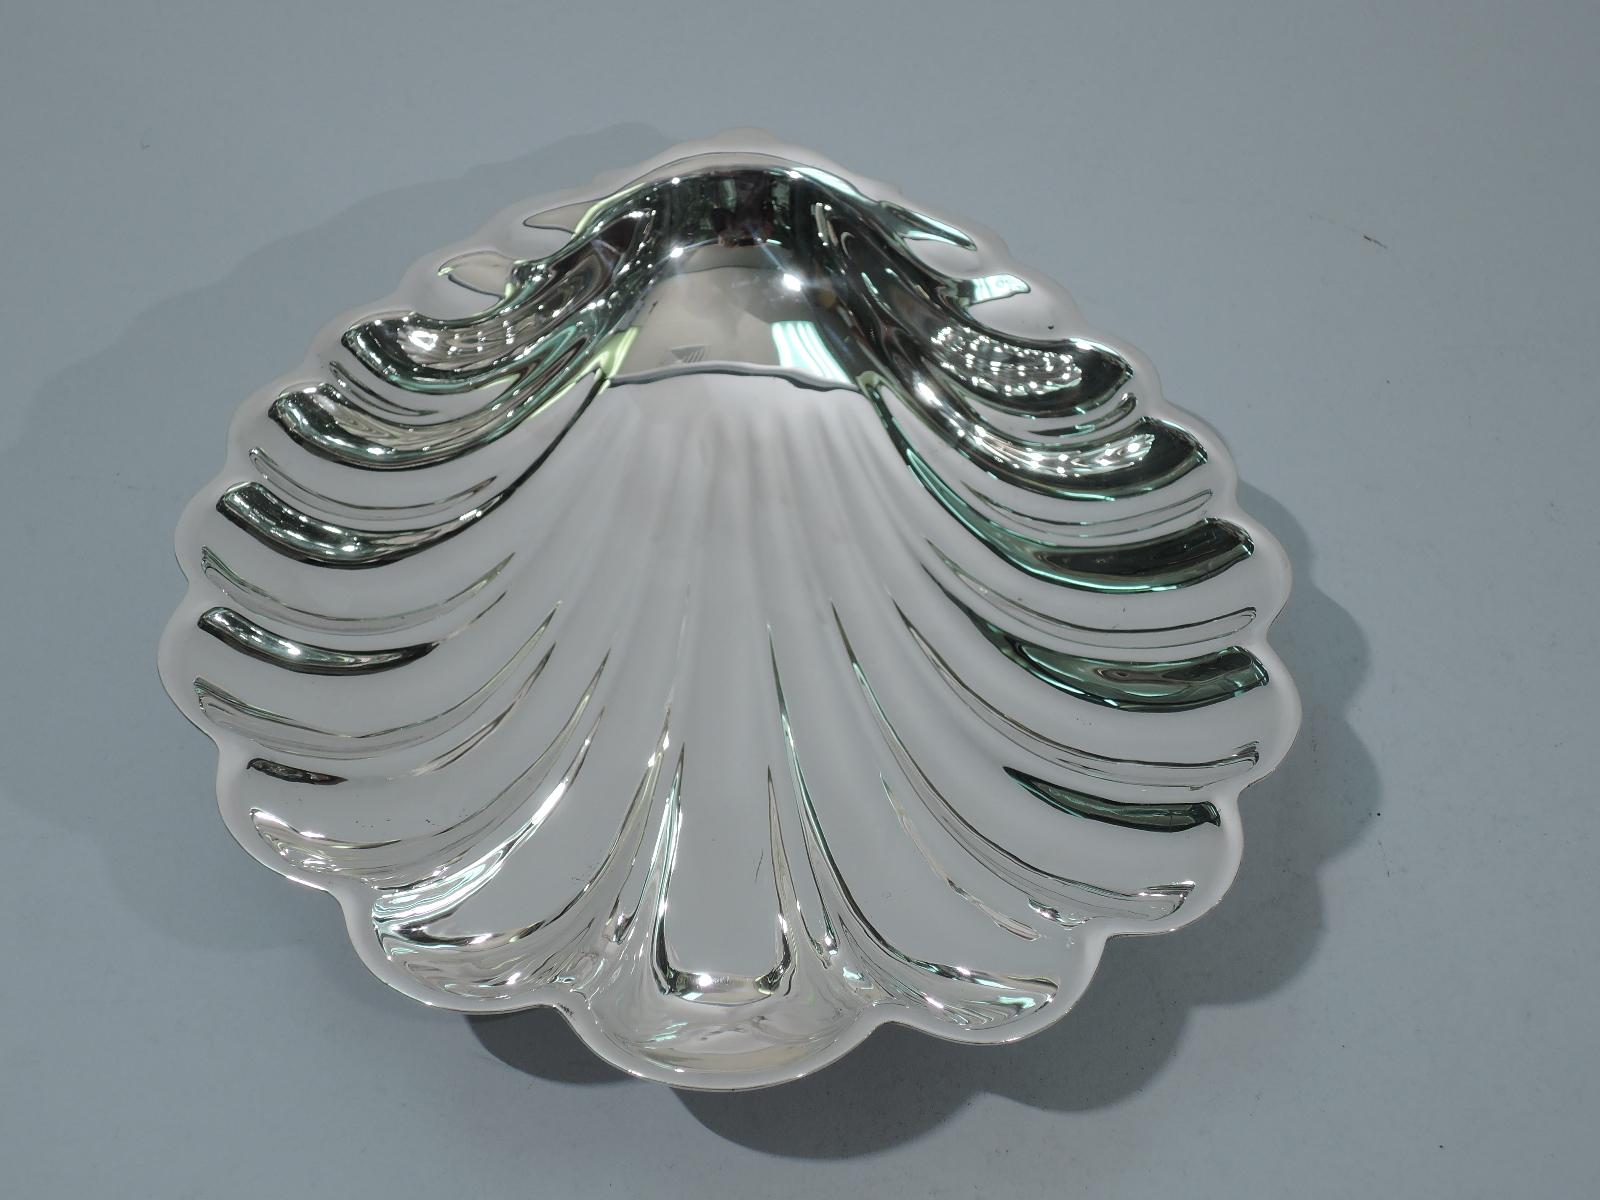 Large sterling silver scallop shell bowl. Made by Gorham in Providence in 1941. Elongated form and dynamic flutes. Rests on 2 balls. Fully marked including date code and no. 42606. Weight: 11 troy ounces.